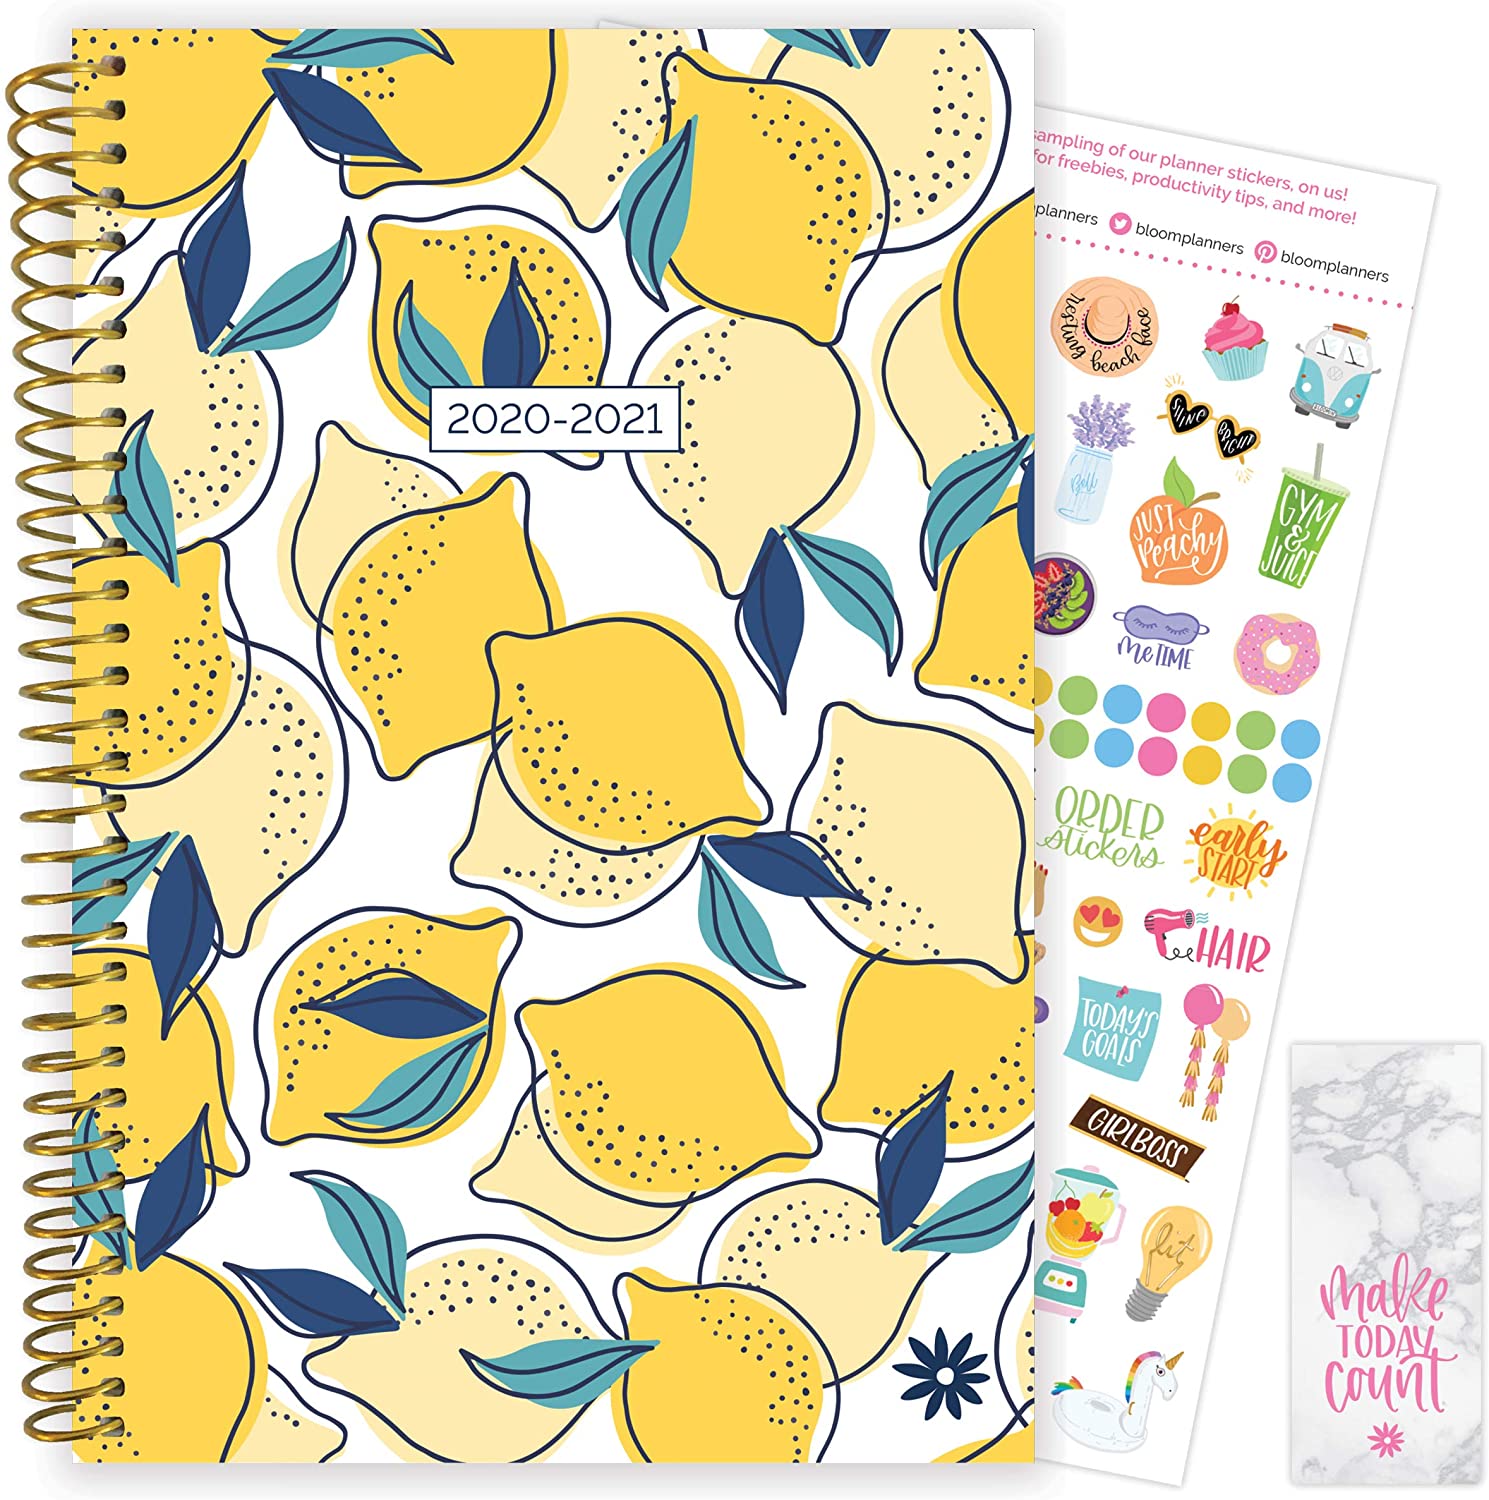 bloom daily planners 2020-2021 Academic Year Day Planner & Calendar (July 2020 - July 2021) - 6” x 8.25” - Weekly/Monthly Agenda Organizer with Stickers and Bookmark - Lemons